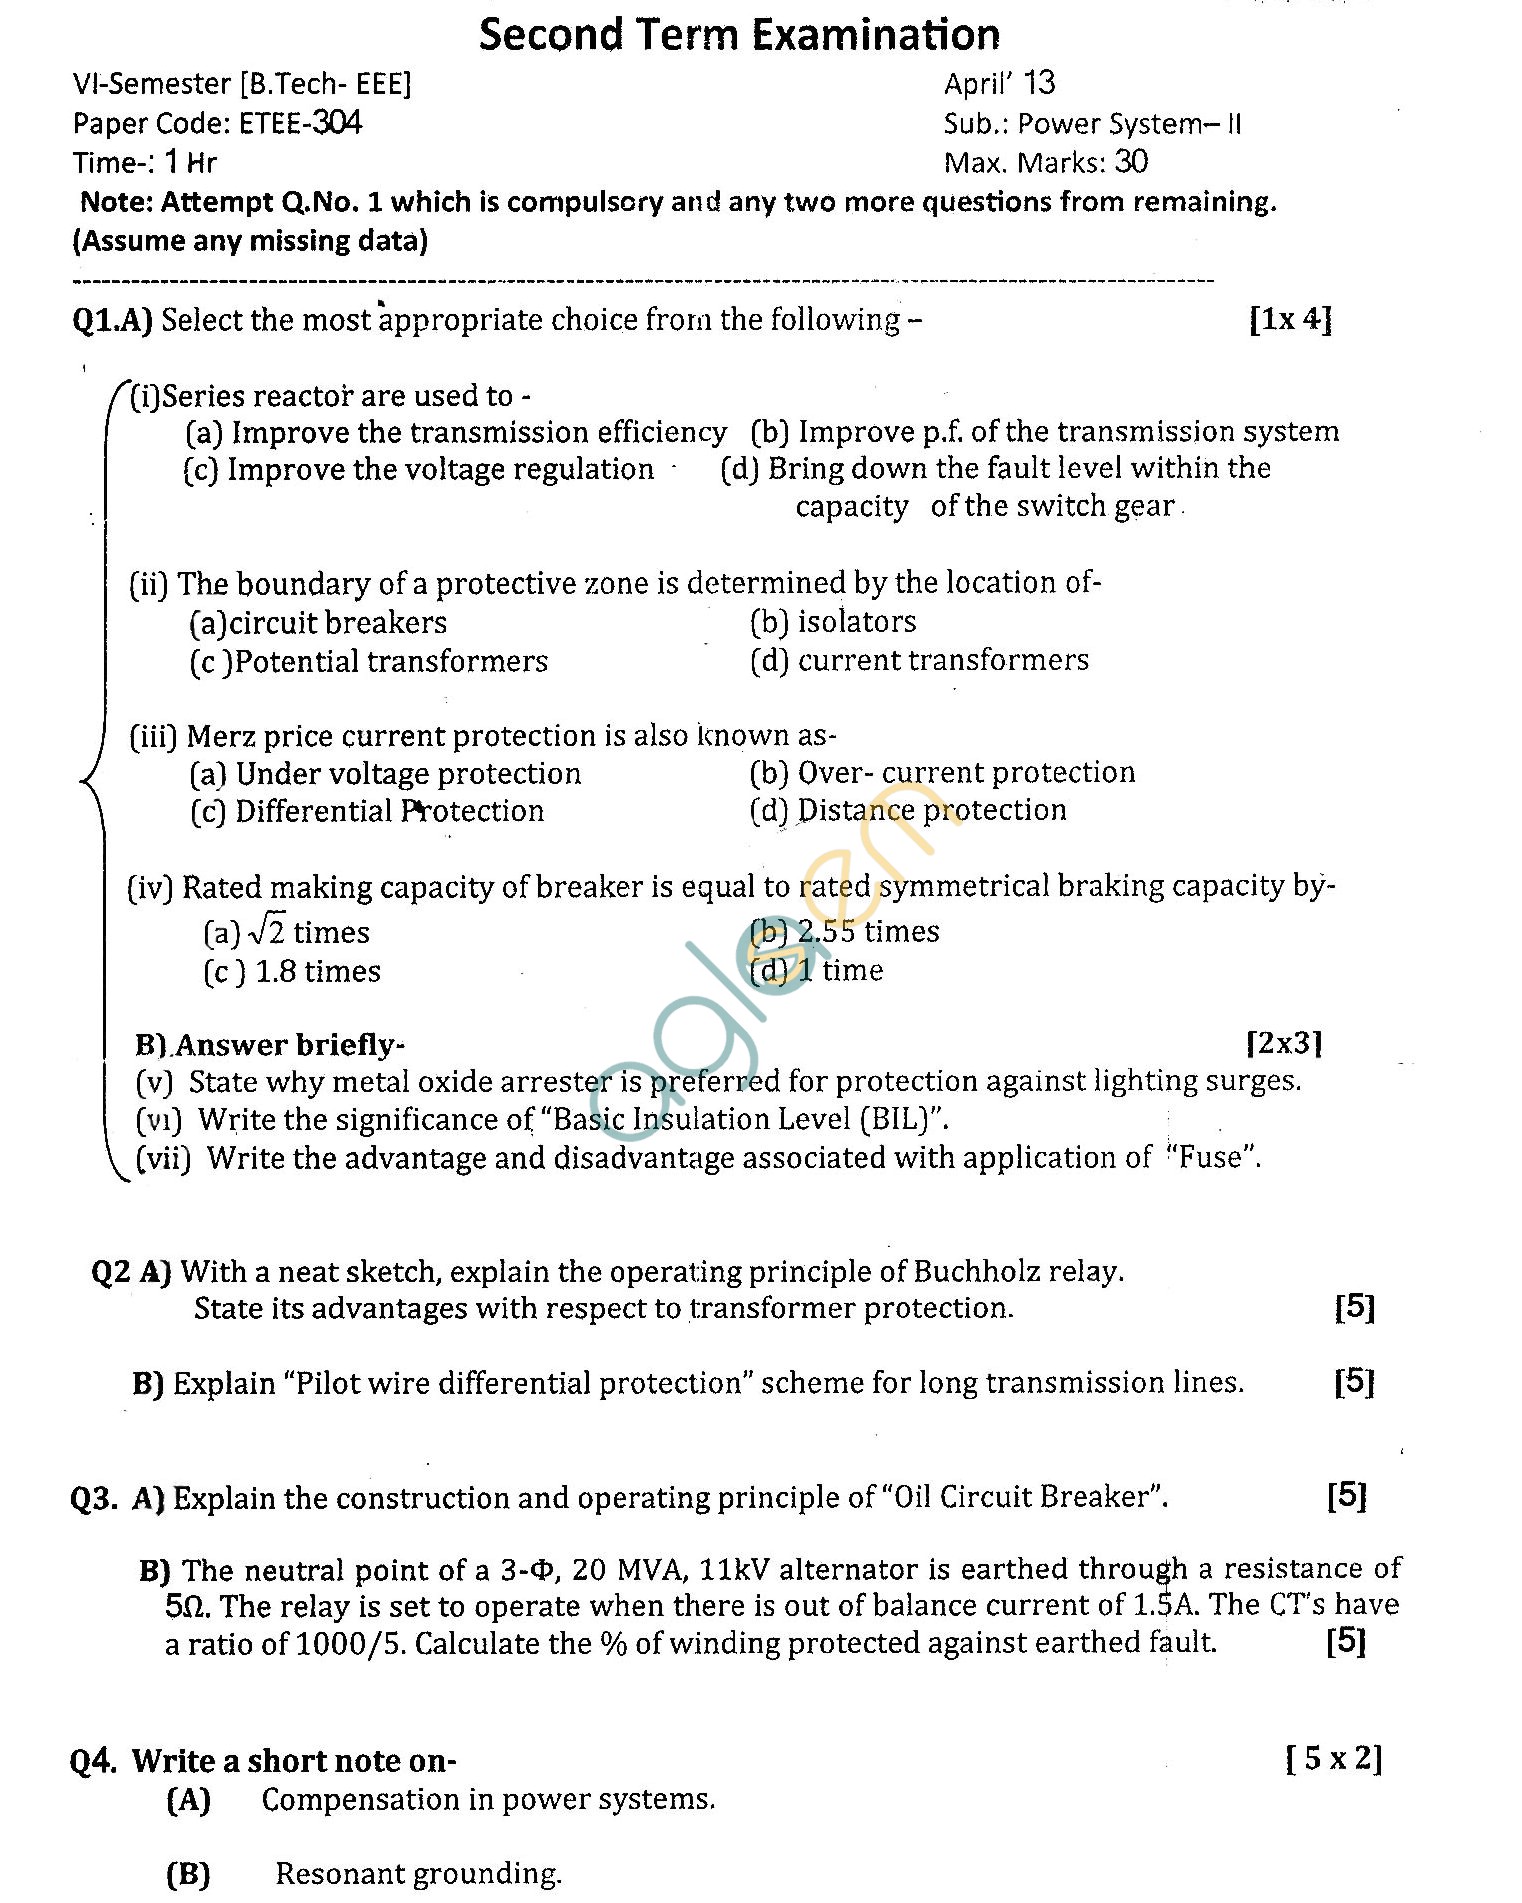 GGSIPU Question Papers Sixth Semester  Second Term 2013  ETEE-304